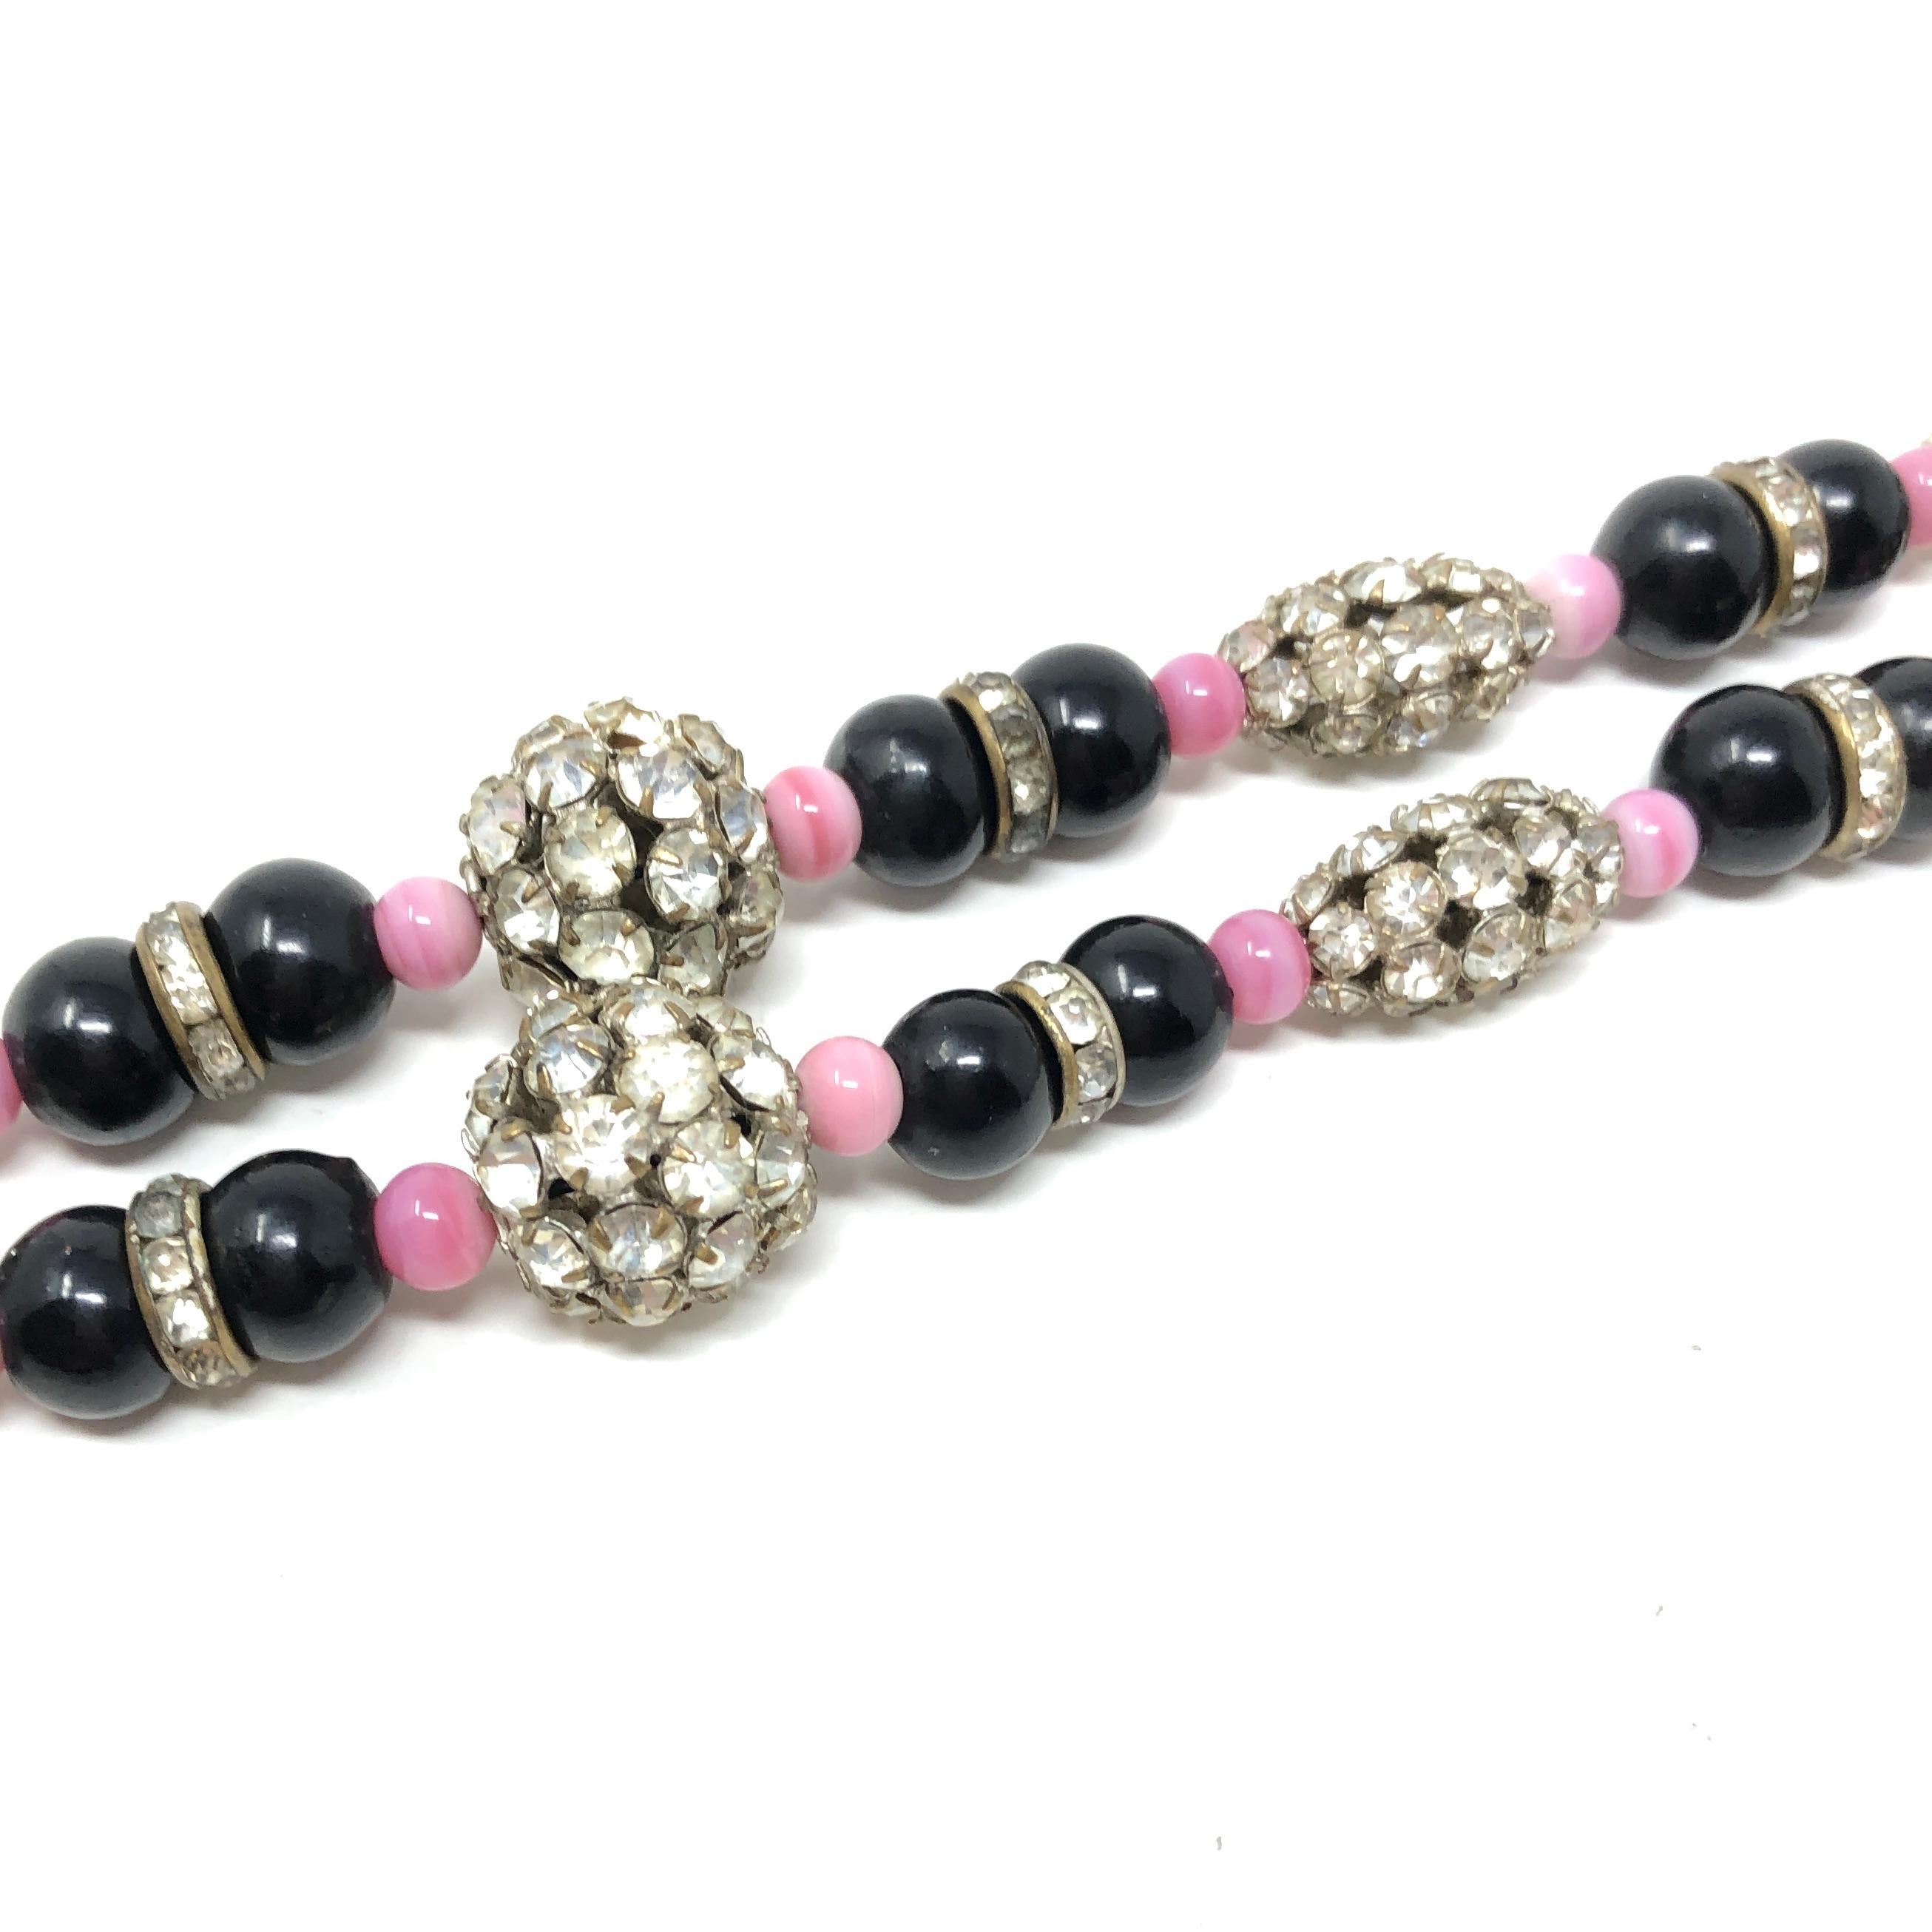 1920s Art Deco Pink and Black Glass Bead Rhinestone Vintage Flapper Necklace For Sale 4